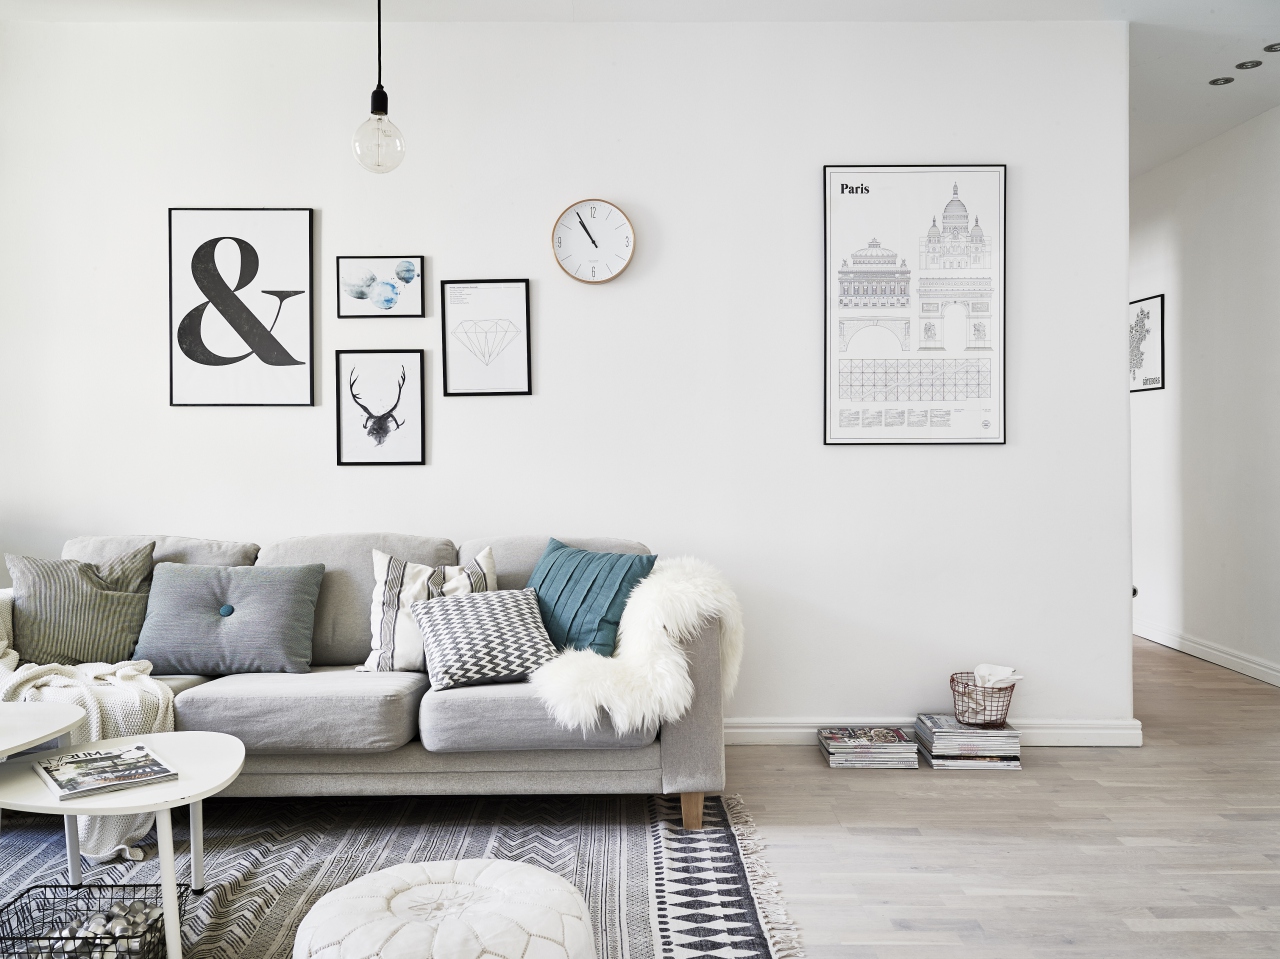 Tips For Creating A Scandinavian Living Room: 7 Ideas To Make A Note Of